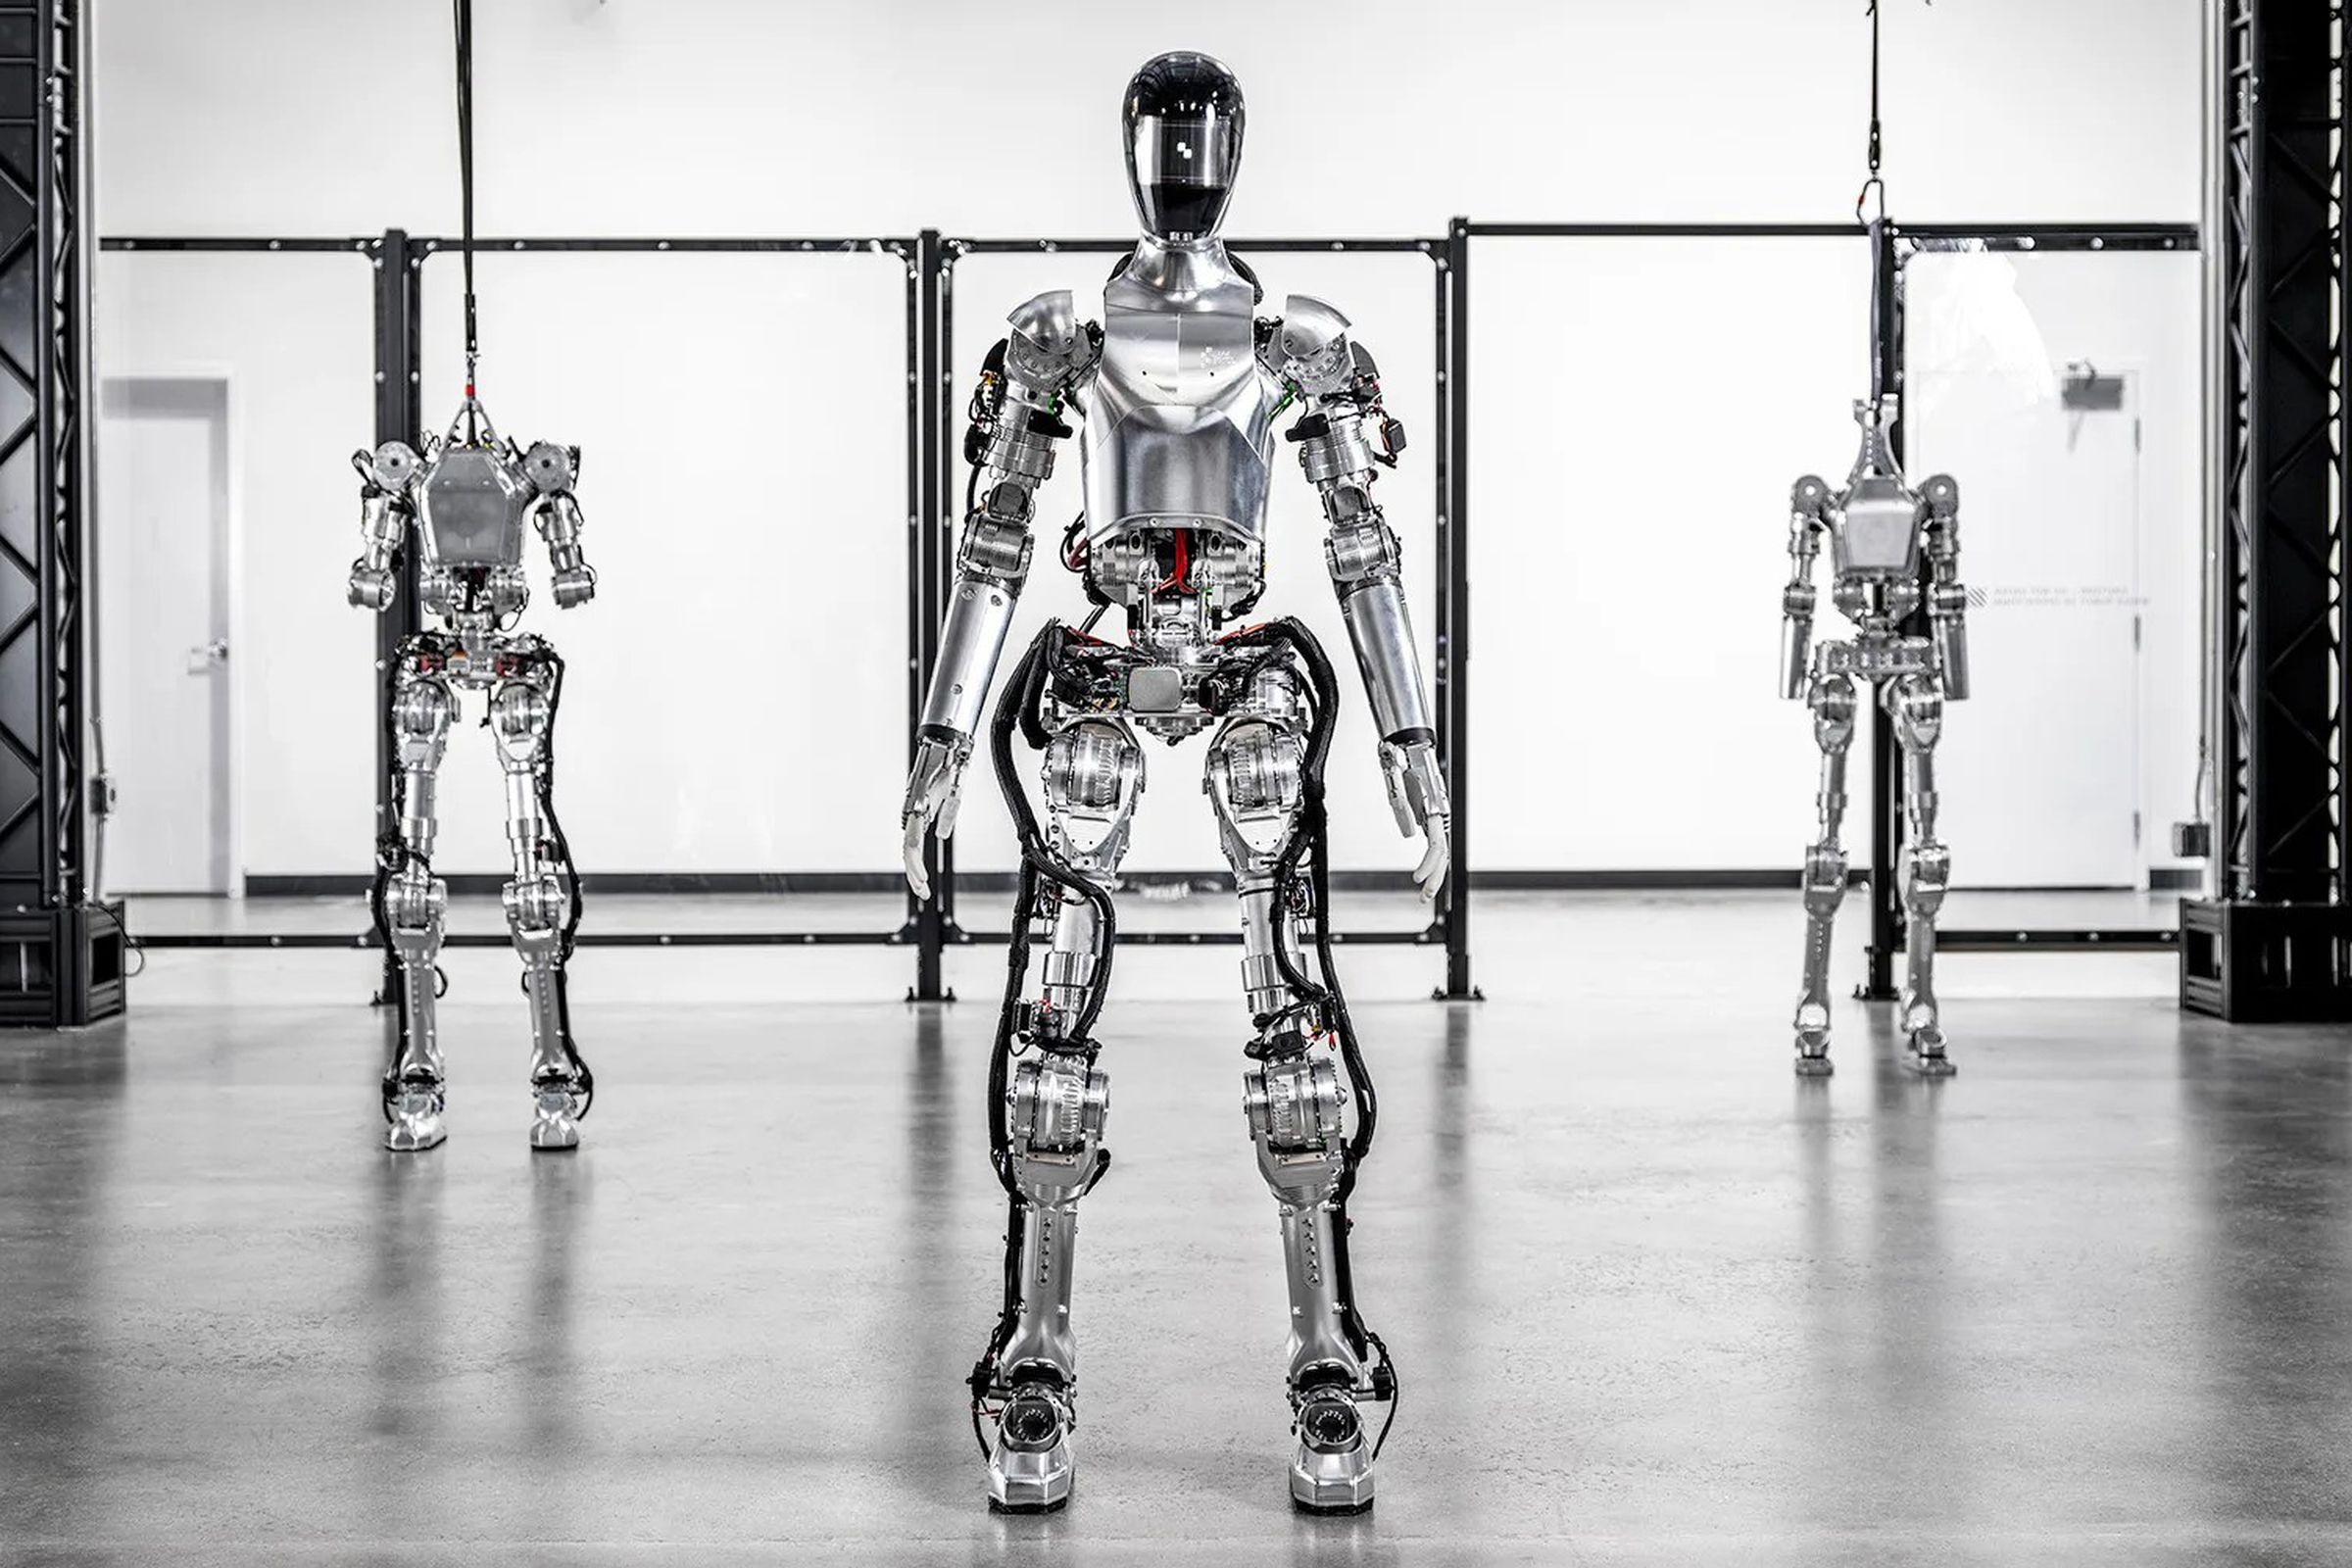 Three of Figure’s prototype humanoid robots displayed in a factory setting.